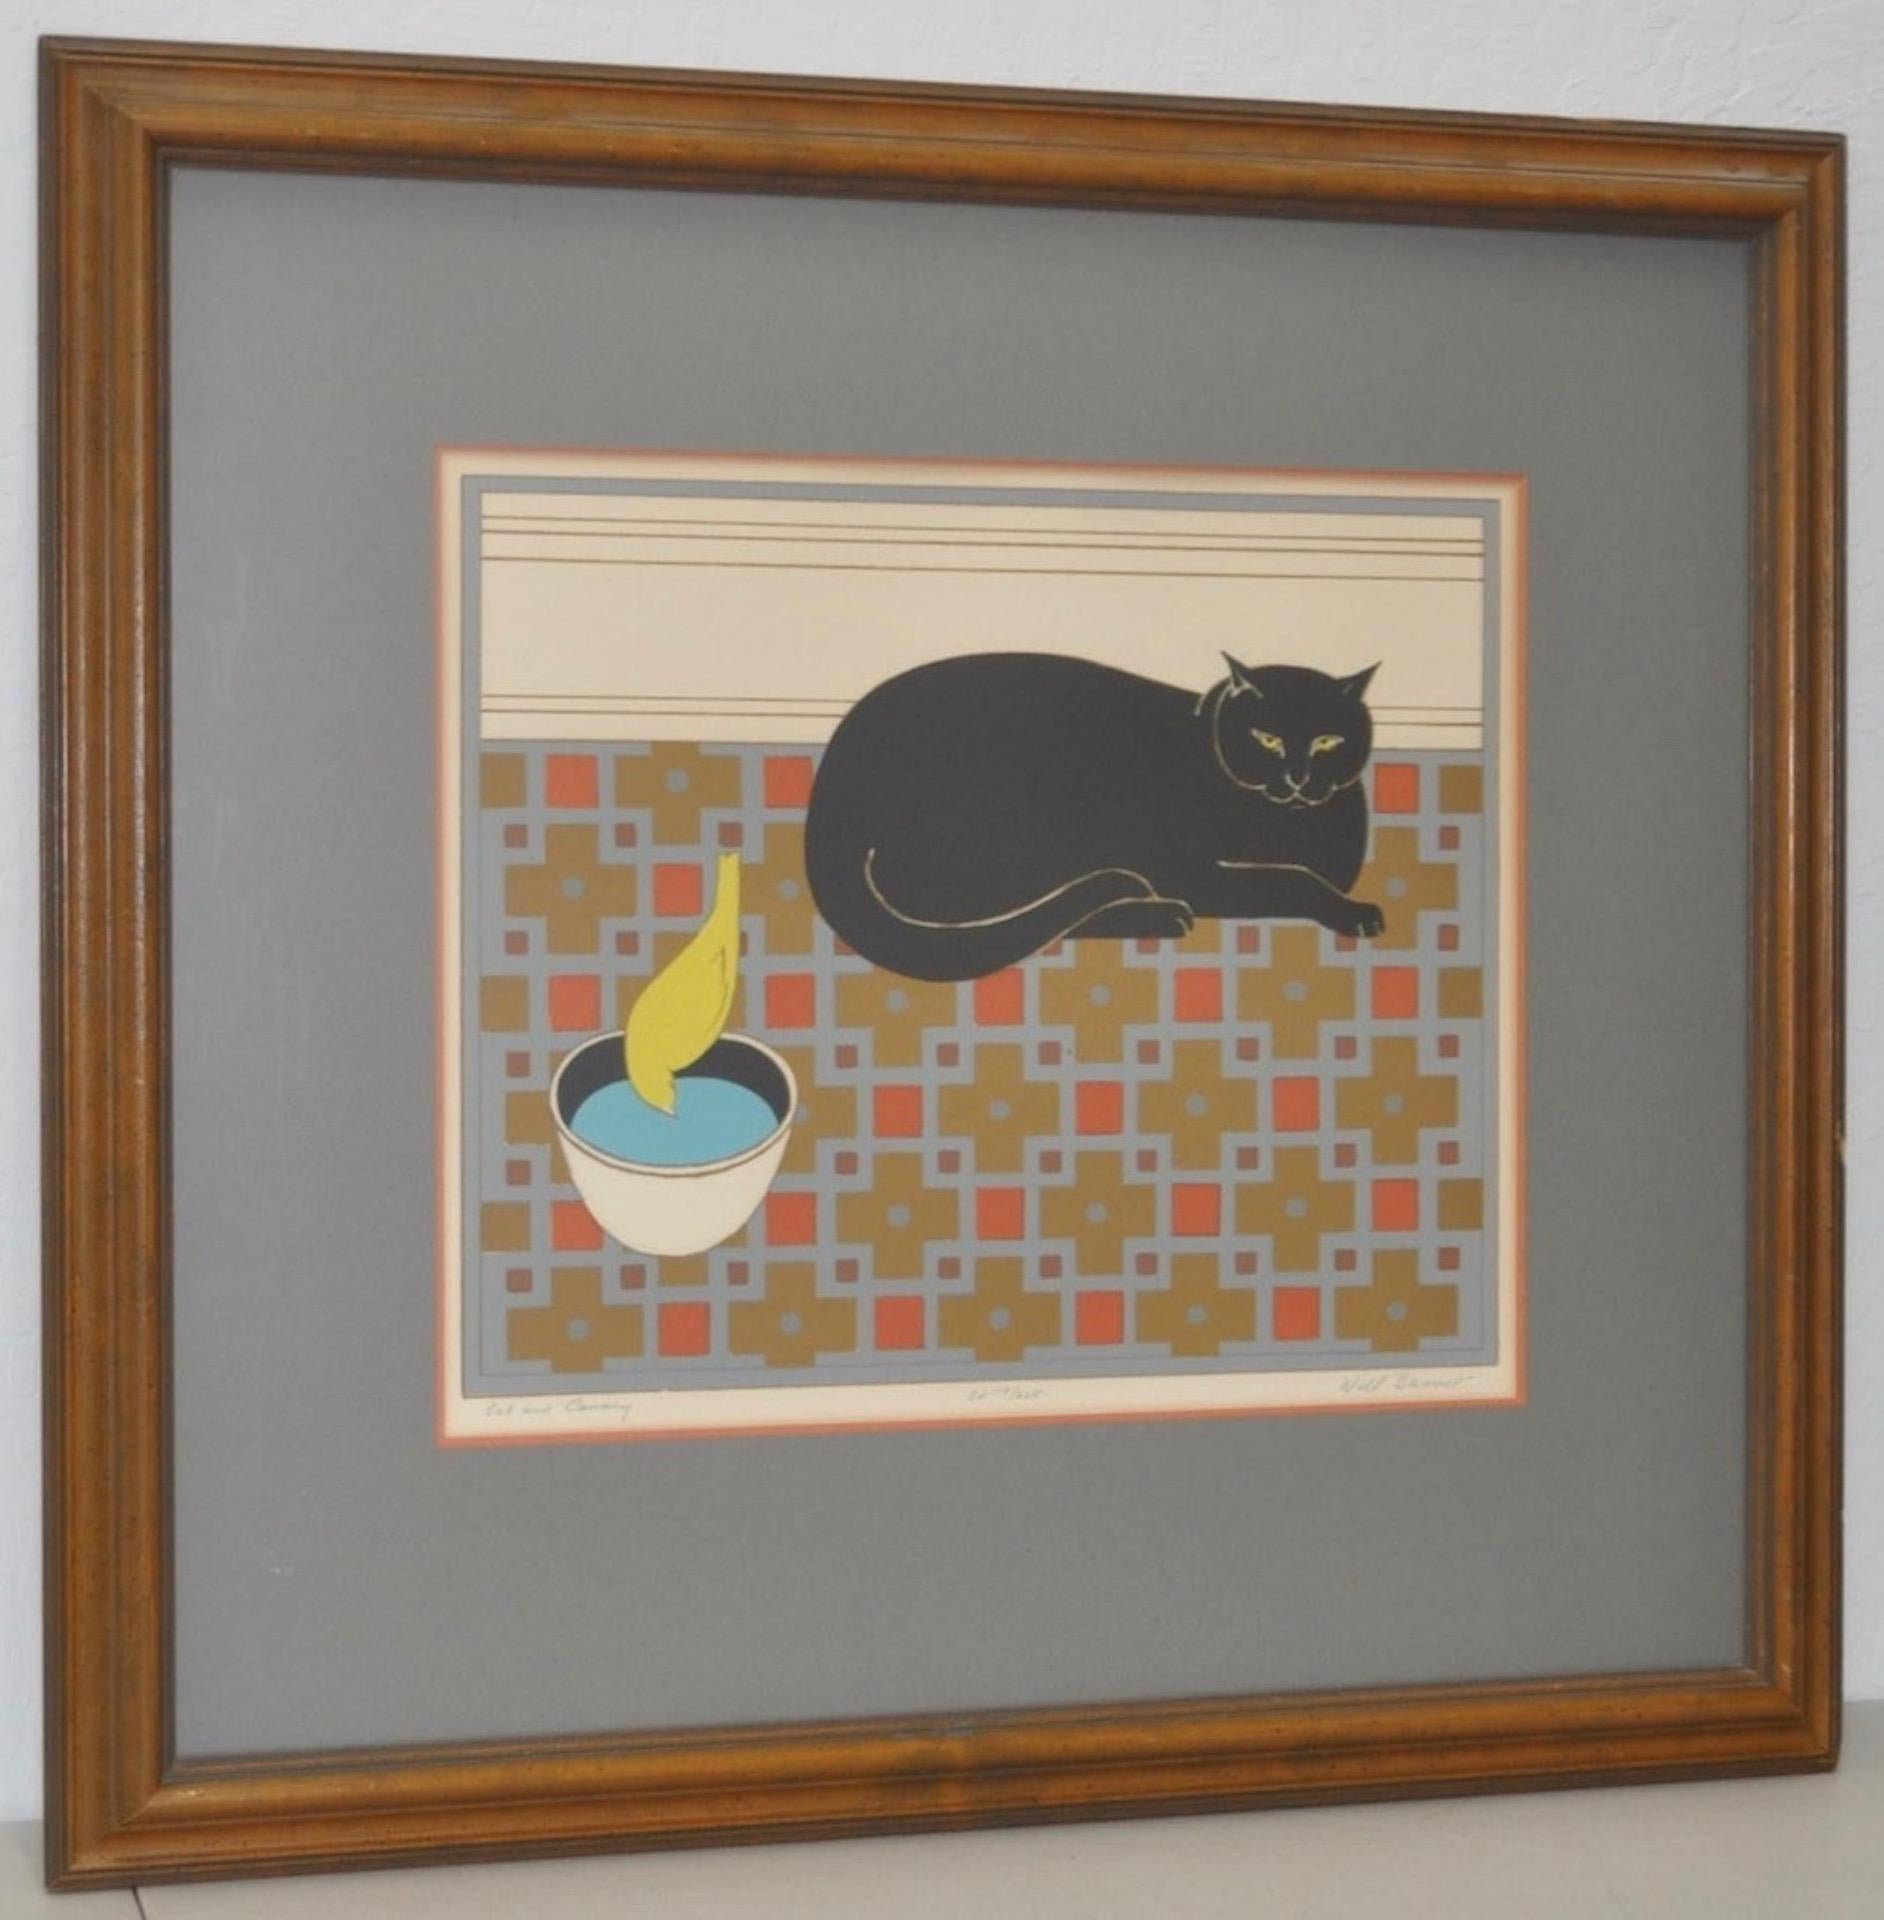 Will Barnet "Cat and Canary" Pencil Signed Lithograph

The little canary is taking no chances, keeping it's eye on the cat while it sneaks a drink of the cats water.

From a limited edition of 225. Pencil signed, numbered and titled.

Dimensions 18"